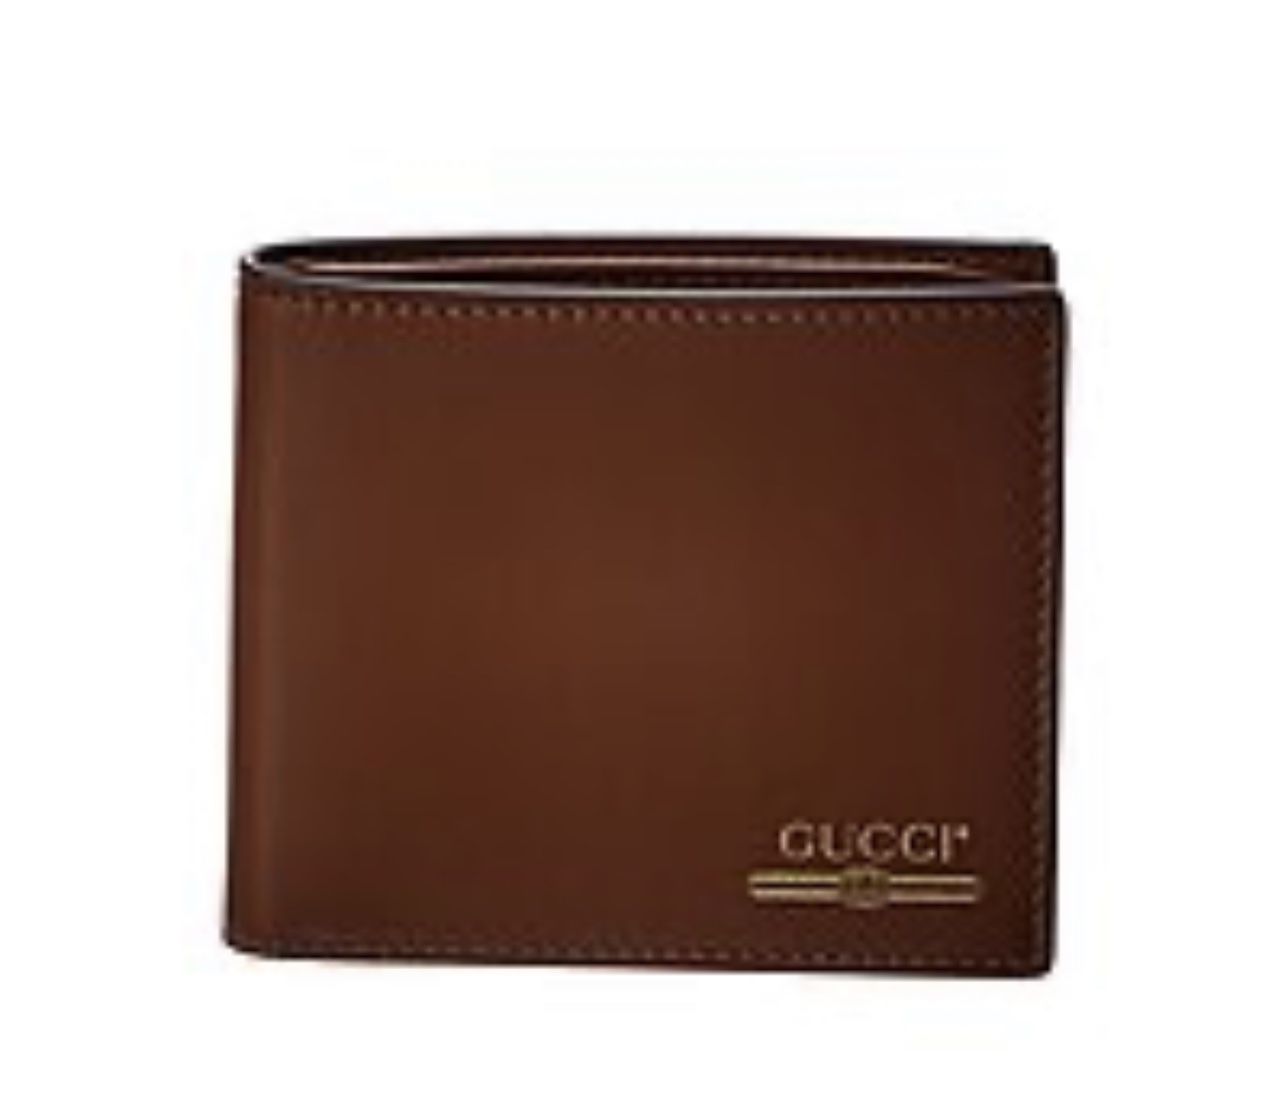 Leather Men’s Gucci Bifold Wallet